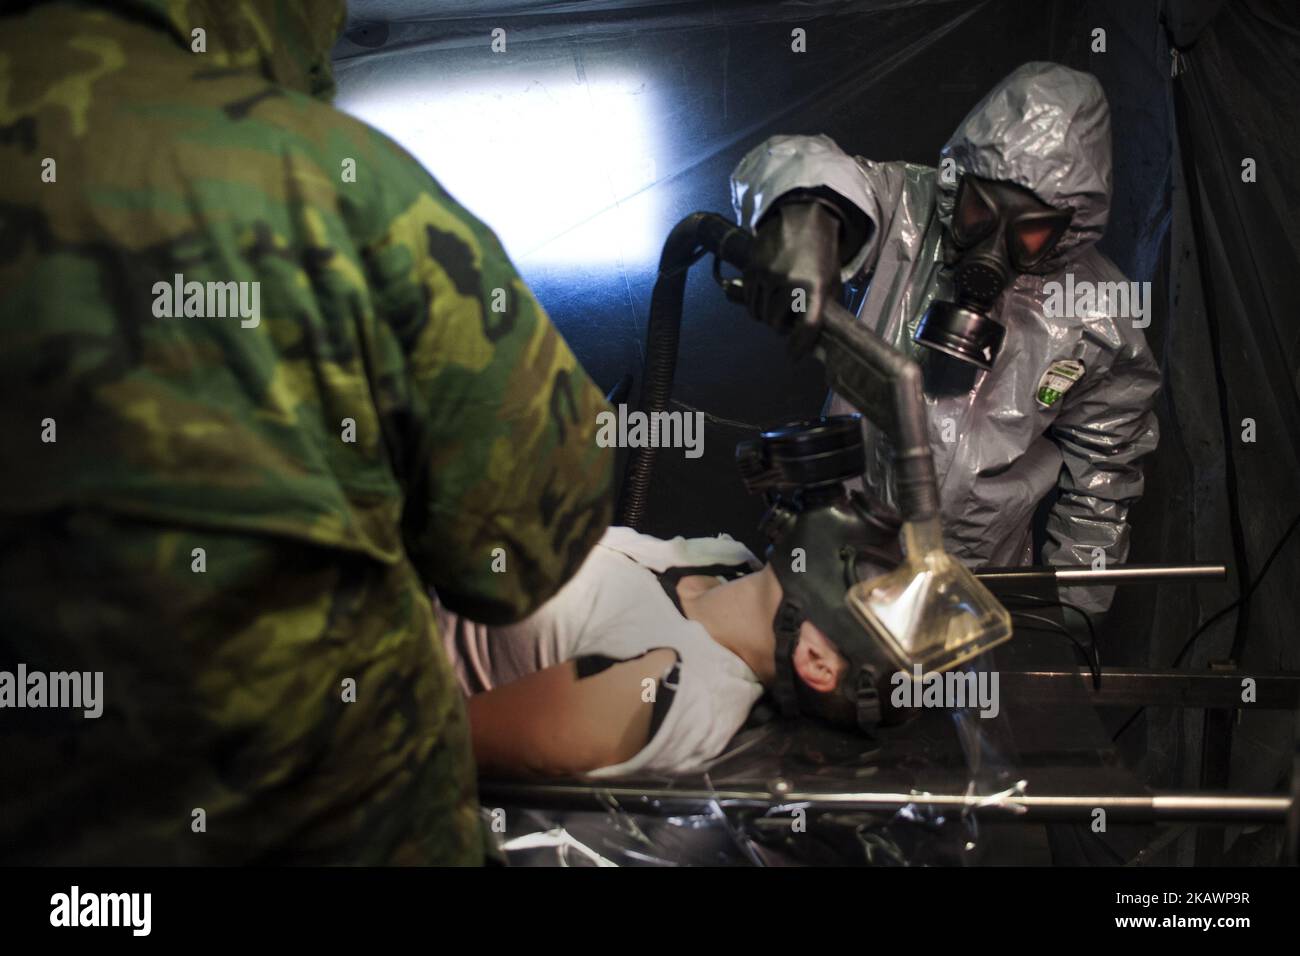 A soldier gives a shower to a victim in the decontamination tunnel in the simulation of a terrorist attack with sarin gas in Santander, Spain on February 23, 2018. (Photo by Joaquin Gomez Sastre/NurPhoto) Stock Photo